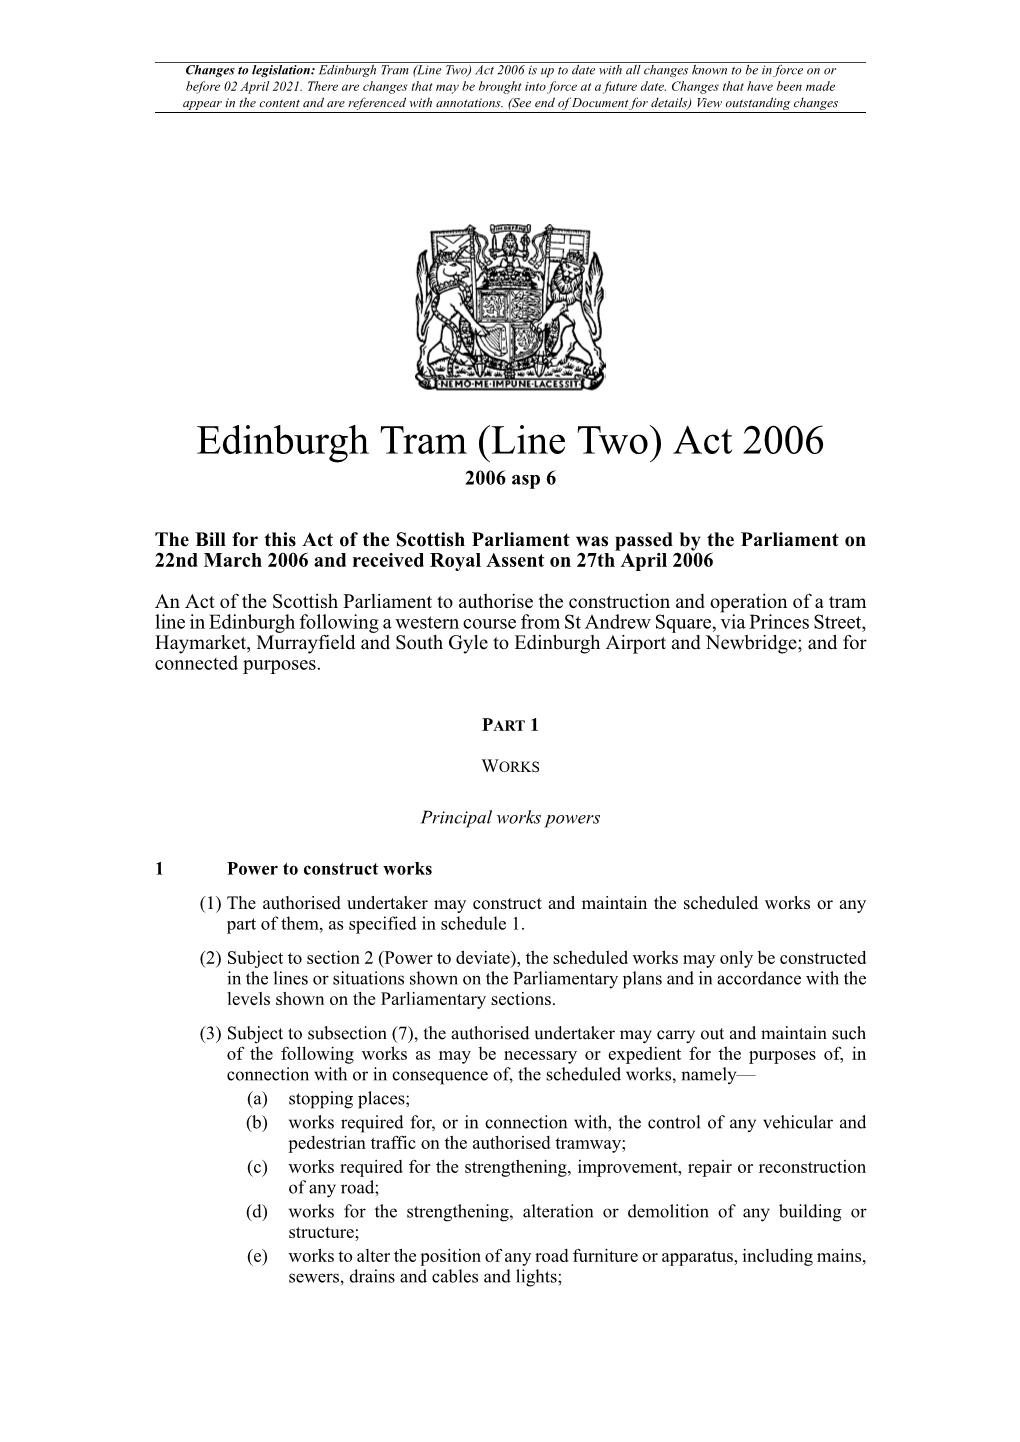 Edinburgh Tram (Line Two) Act 2006 Is up to Date with All Changes Known to Be in Force on Or Before 02 April 2021